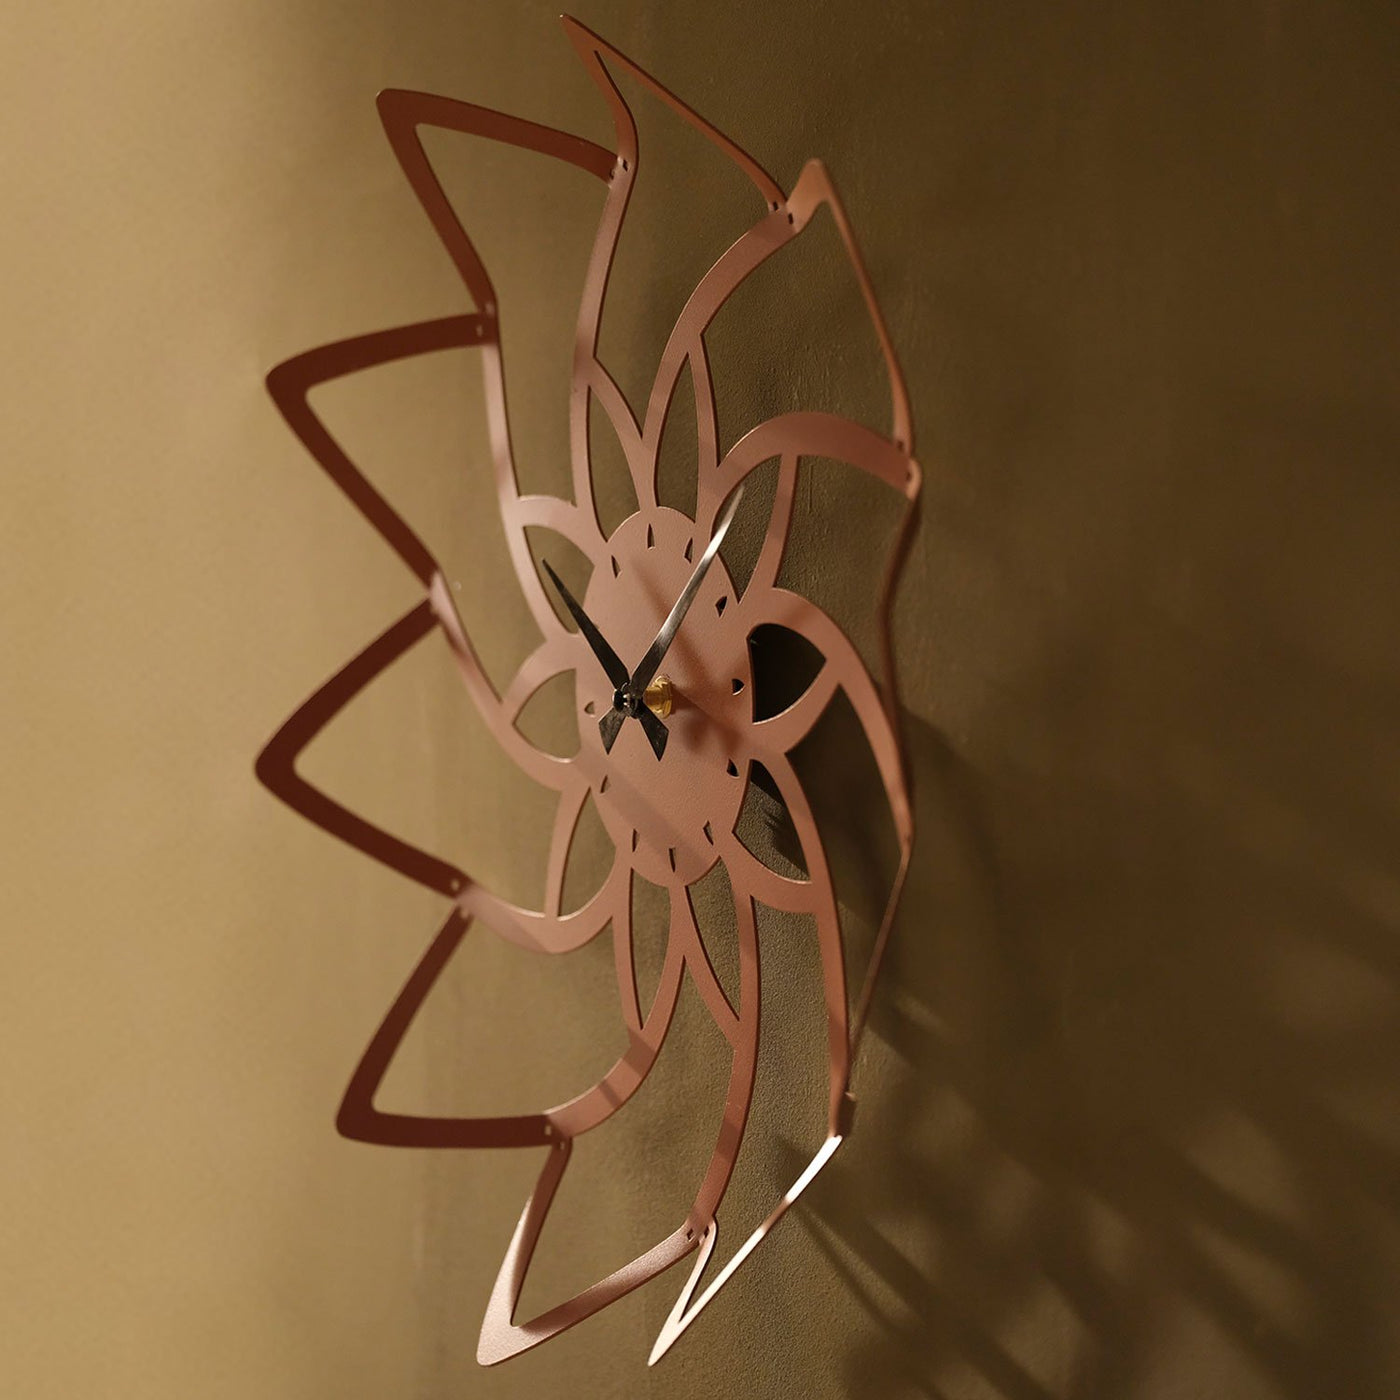 Lotus, Metal, Wall Clock, Decoration, Flower, Abudance, Youth, Living Spaces, Home Gift